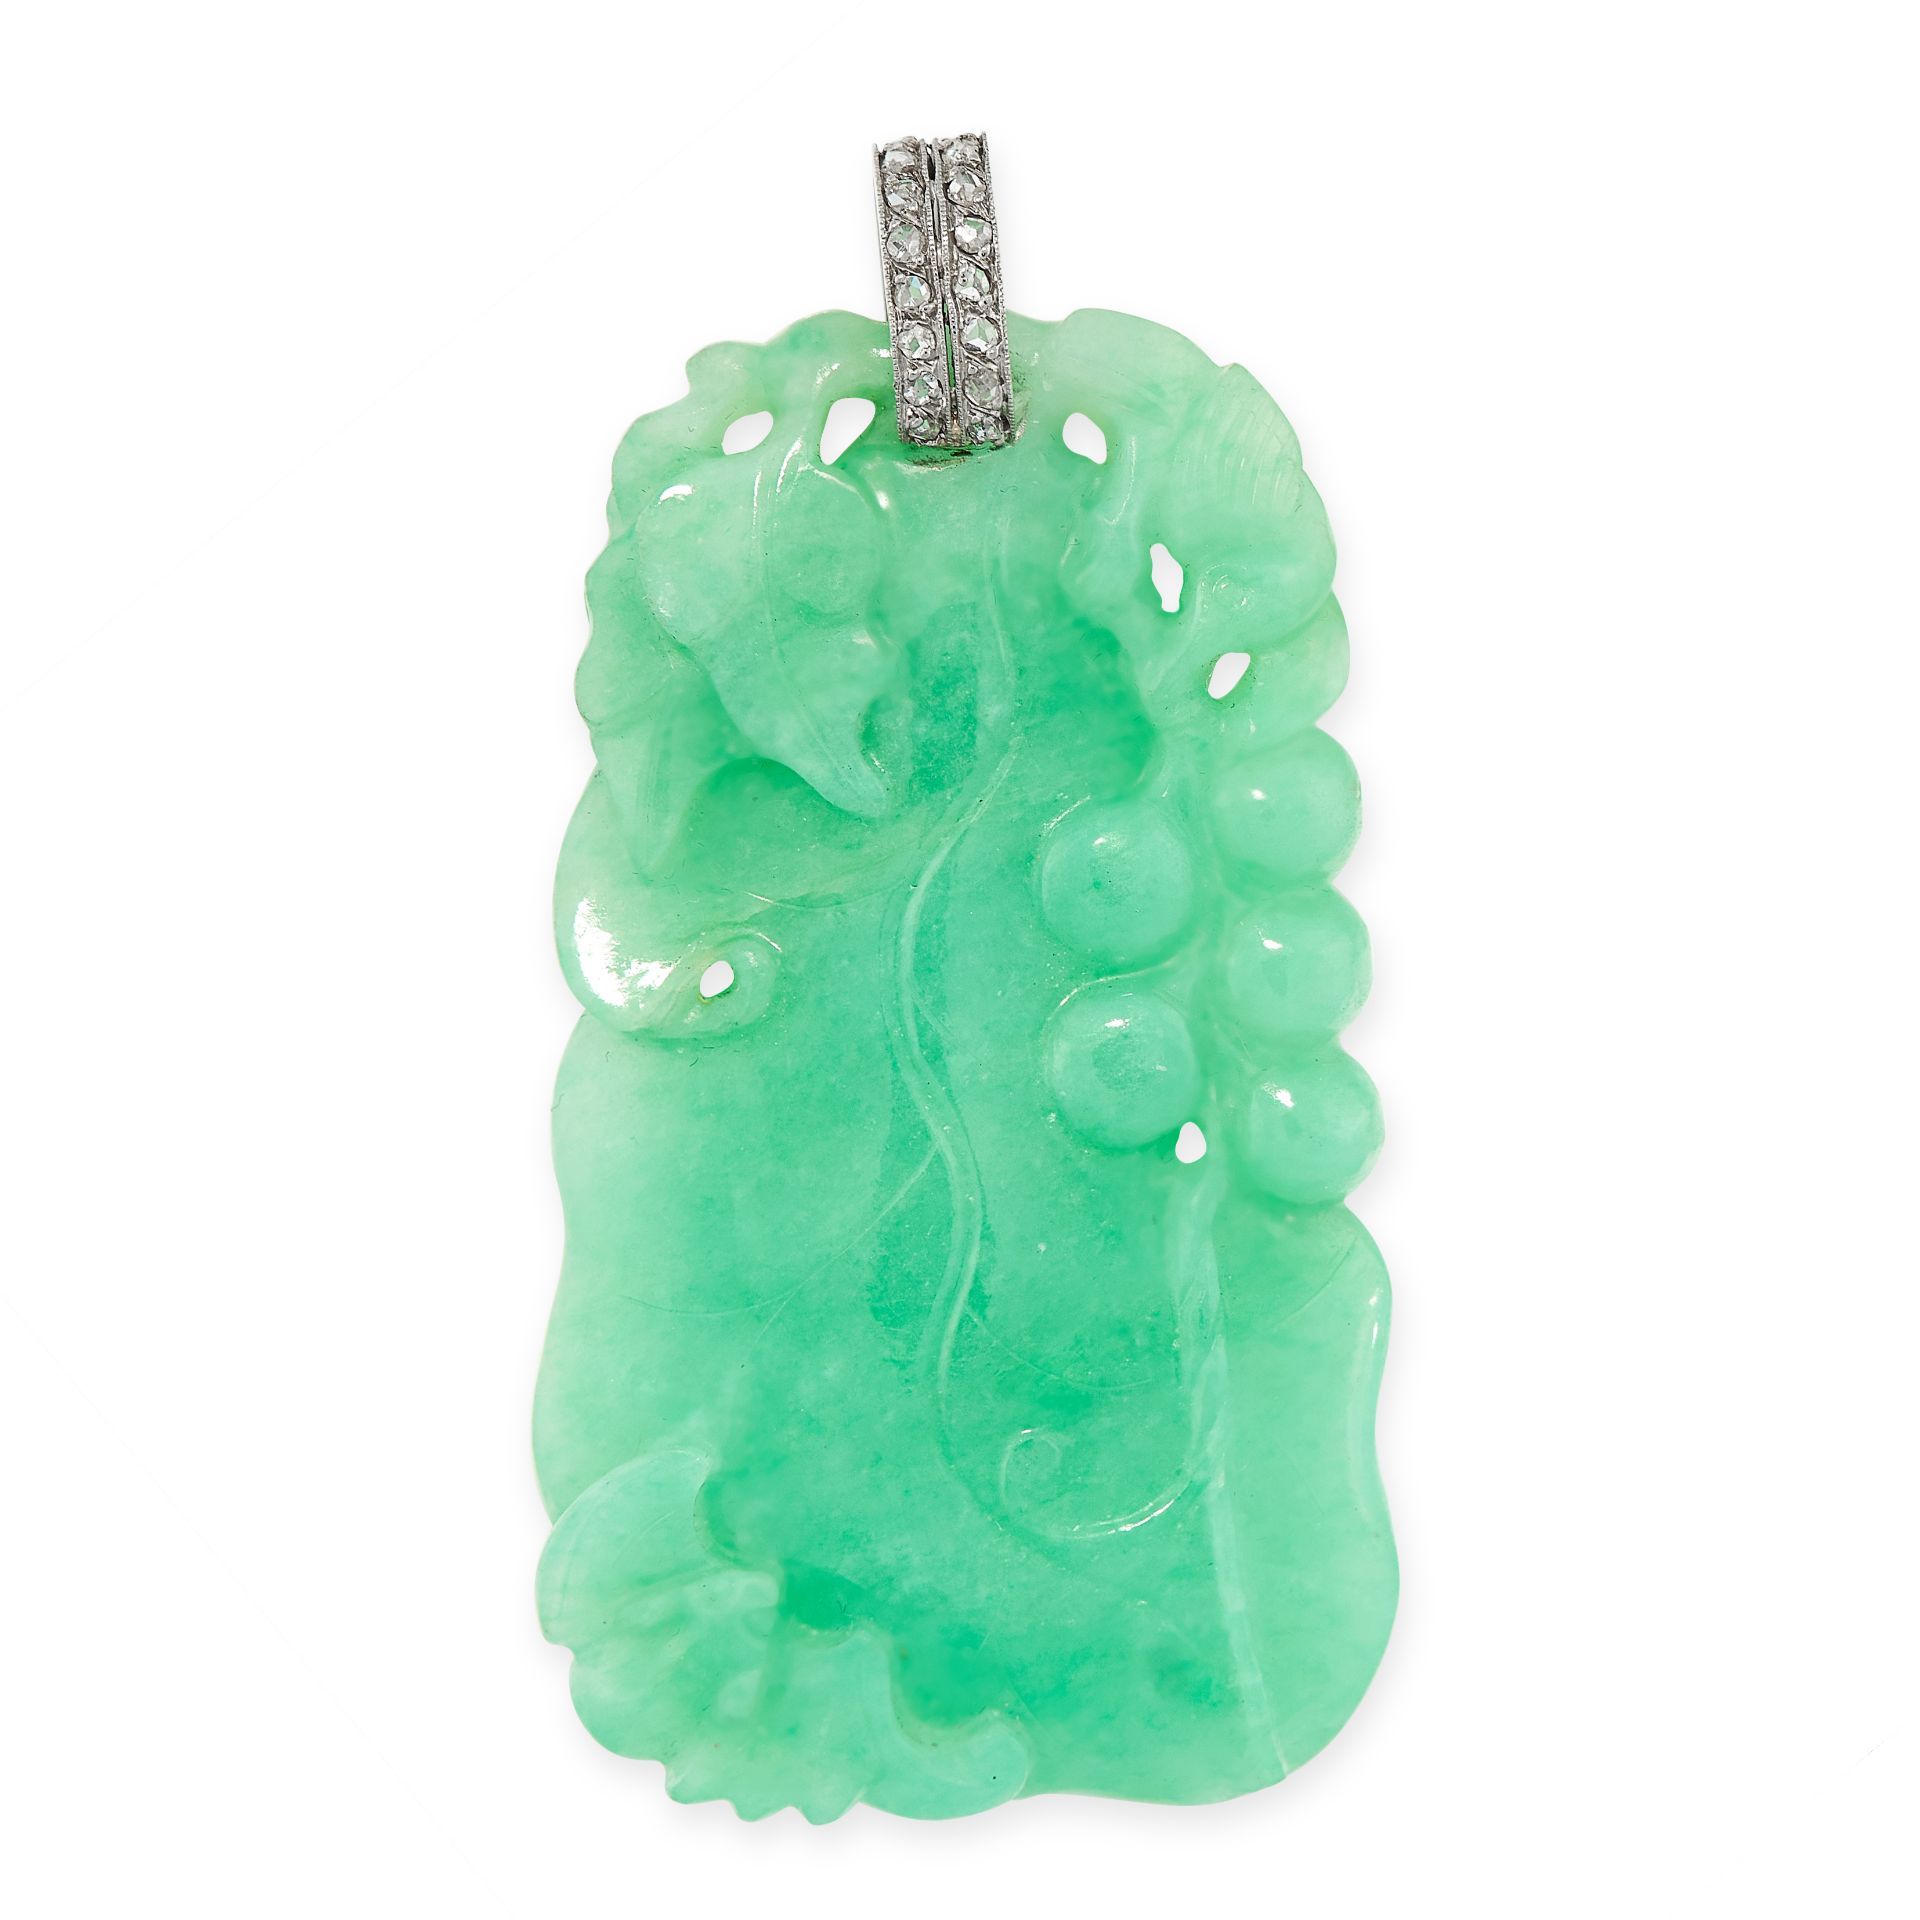 A NATURAL JADEITE JADE AND DIAMOND PENDANT the body formed of a single piece of jadeite, carved to